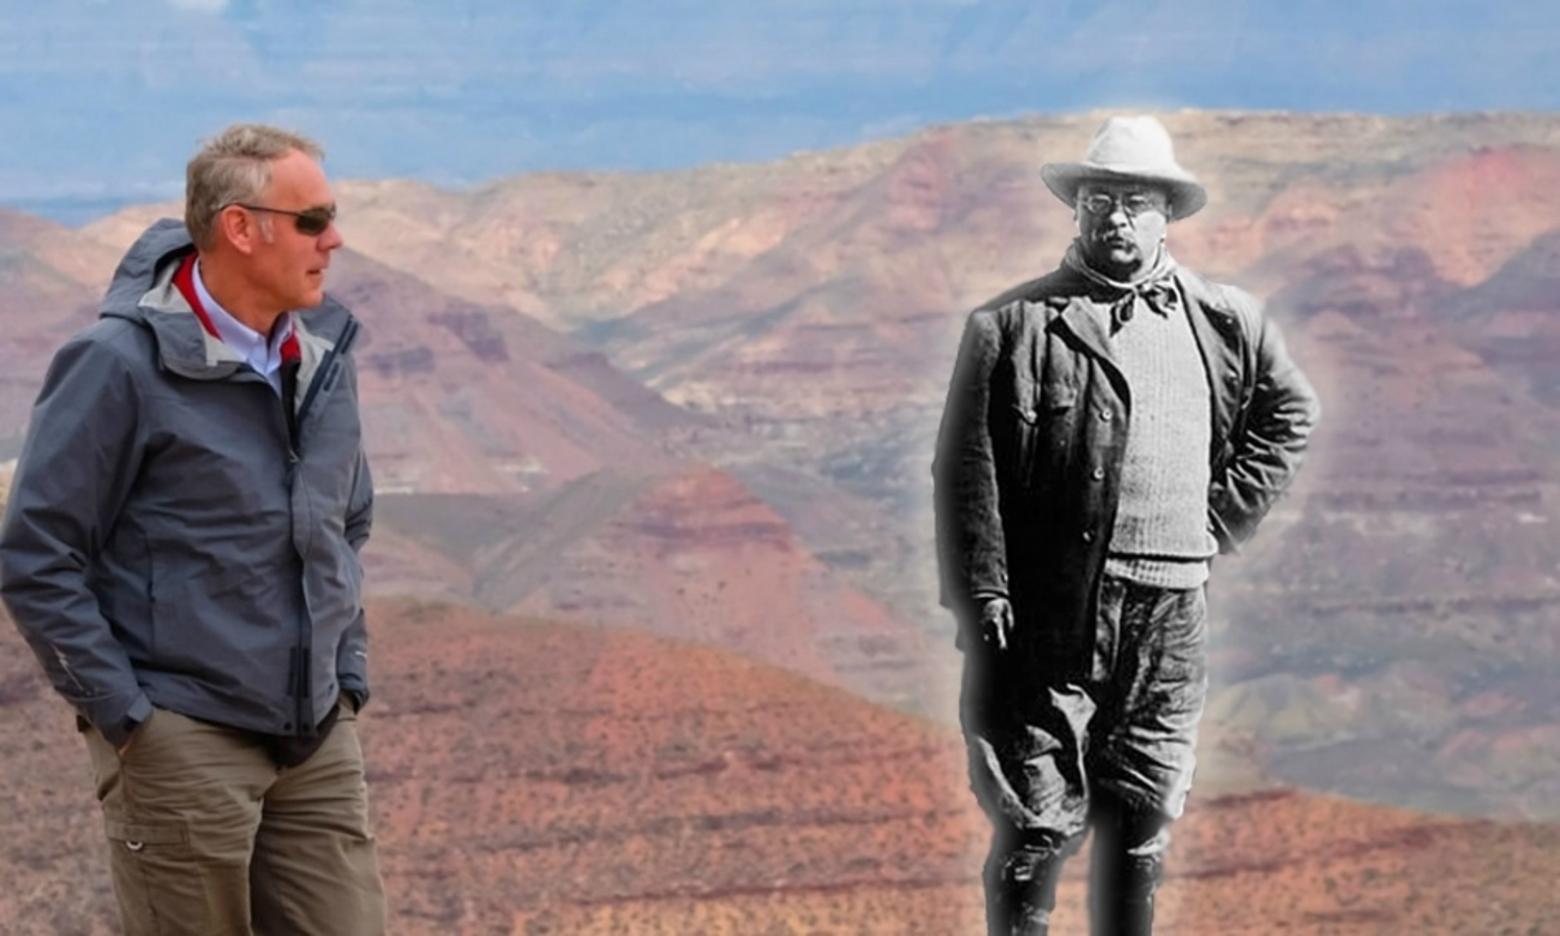 Seeing a ghost? After Interior Secretary Ryan Zinke and President Trump went to Utah and radically scaled back the size of Bears Ears and Grand Staircase-Escalante national monuments, Zinke continued to claim that TR remained a guiding light in his thinking about conservation. Historians say the monument action instead would make Roosevelt roll in his grave.